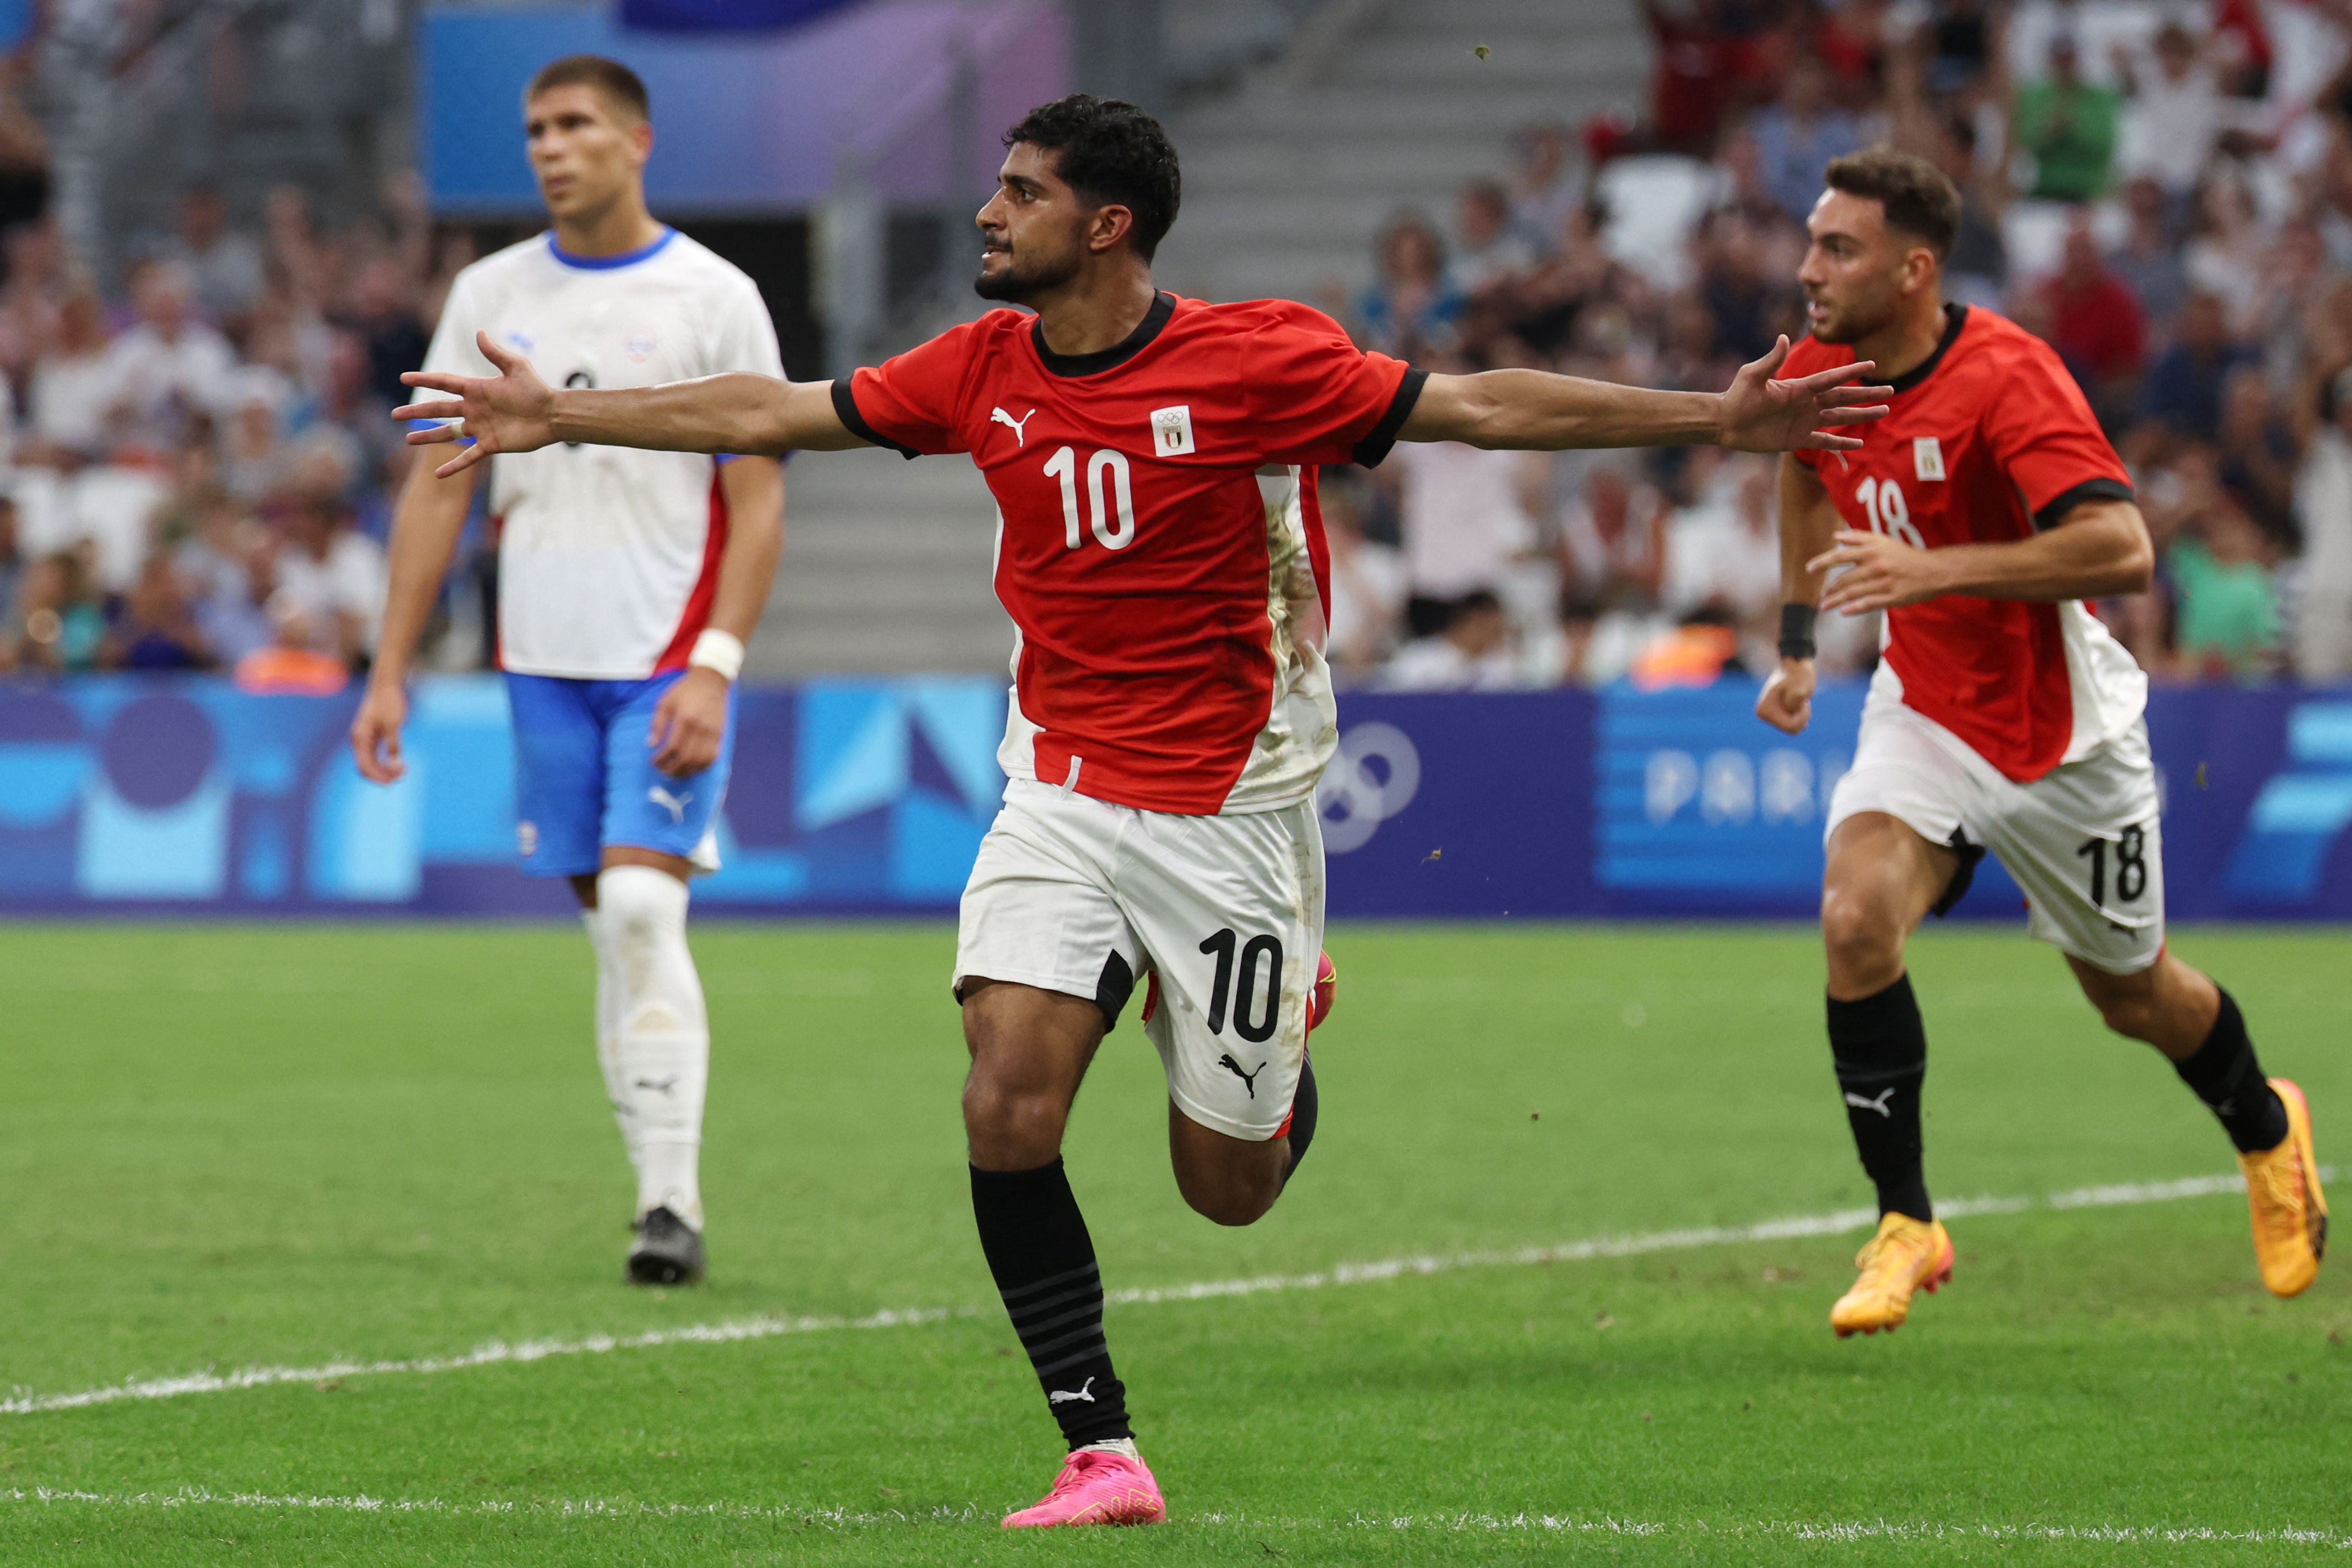 Egypt's midfielder #10 Ibrahim Adel celebrates scoring the equalizing goal in the men's quarter-final football match between Egypt and Paraguay during the Paris 2024 Olympic Games at the Marseille Stadium in Marseille on August 2, 2024. (Photo by Pascal GUYOT / AFP)